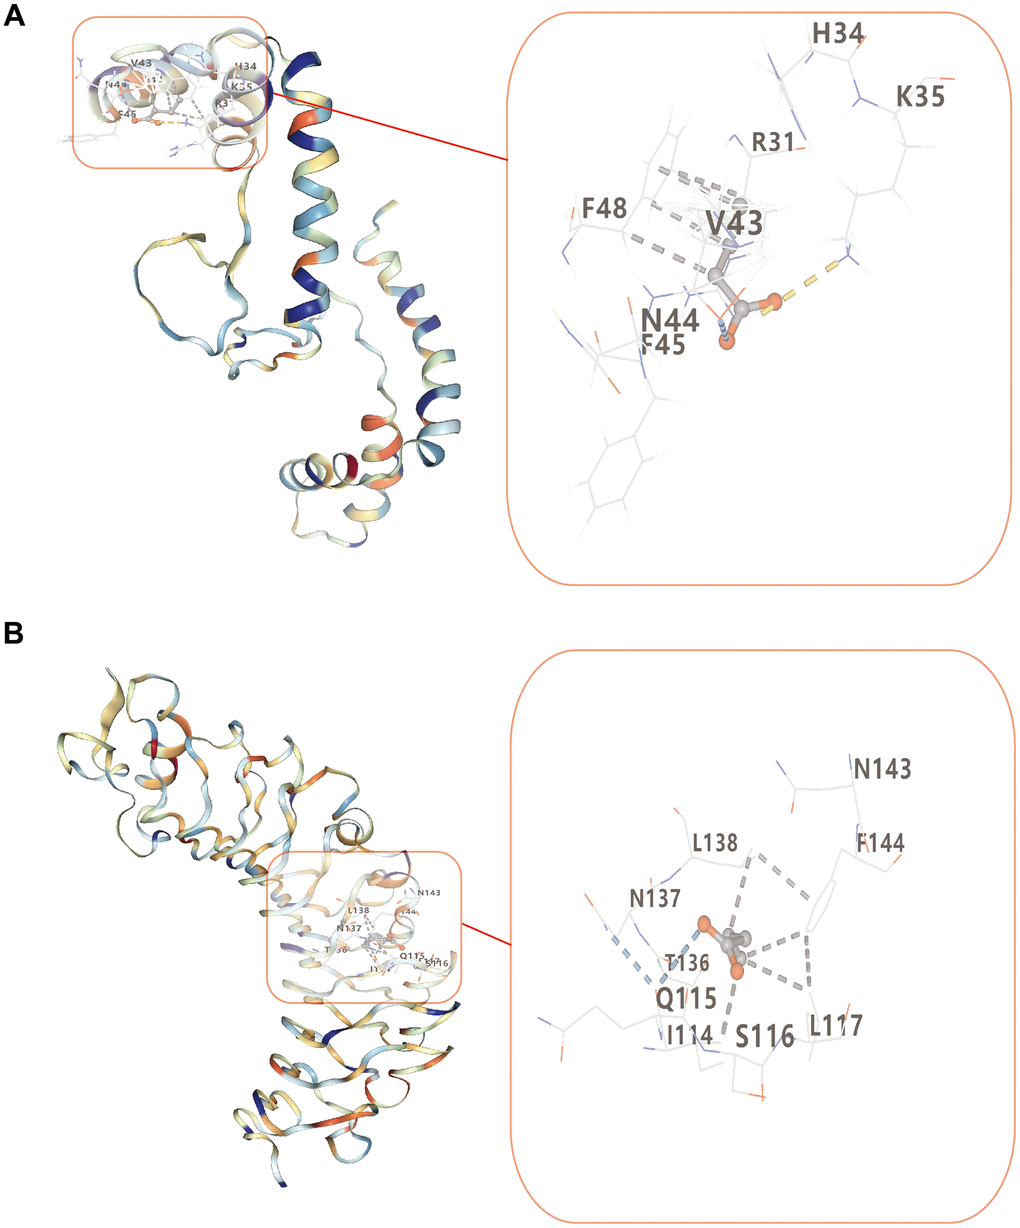 Molecular docking of butyrate and two target proteins. (A) Molecular docking between butyrate and HMGB1. (B) Molecular docking between butyrate and TLR4.